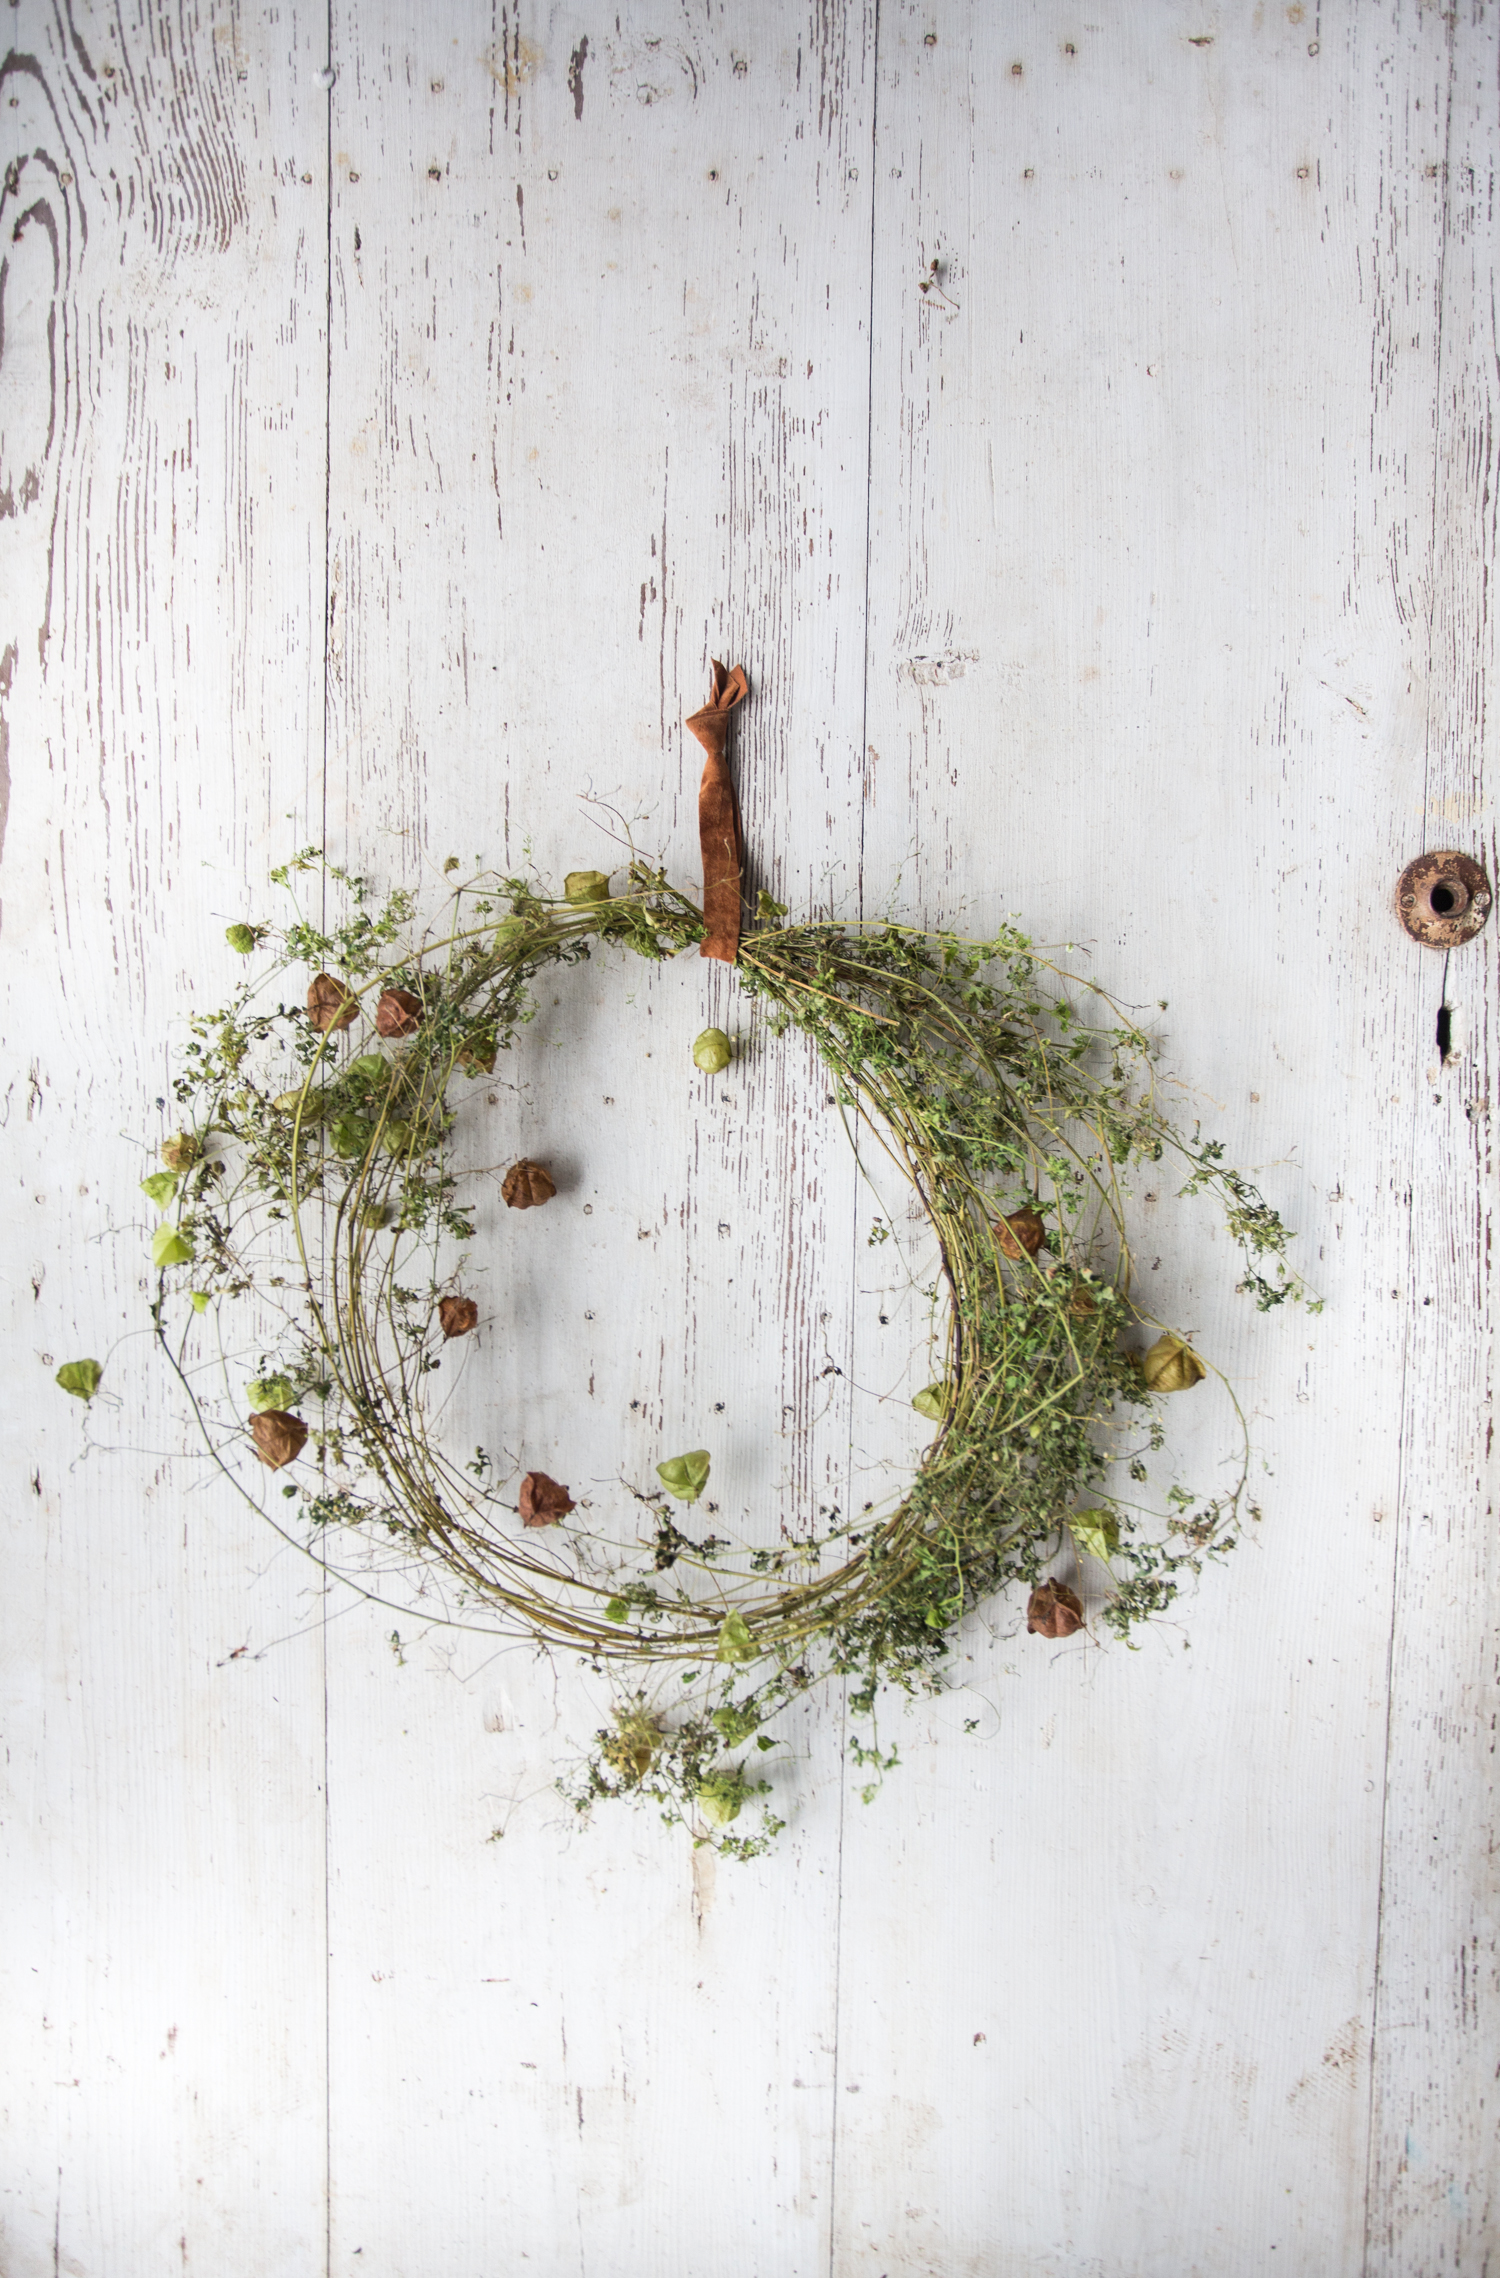 wreath-making with mandy — Beauty Everyday